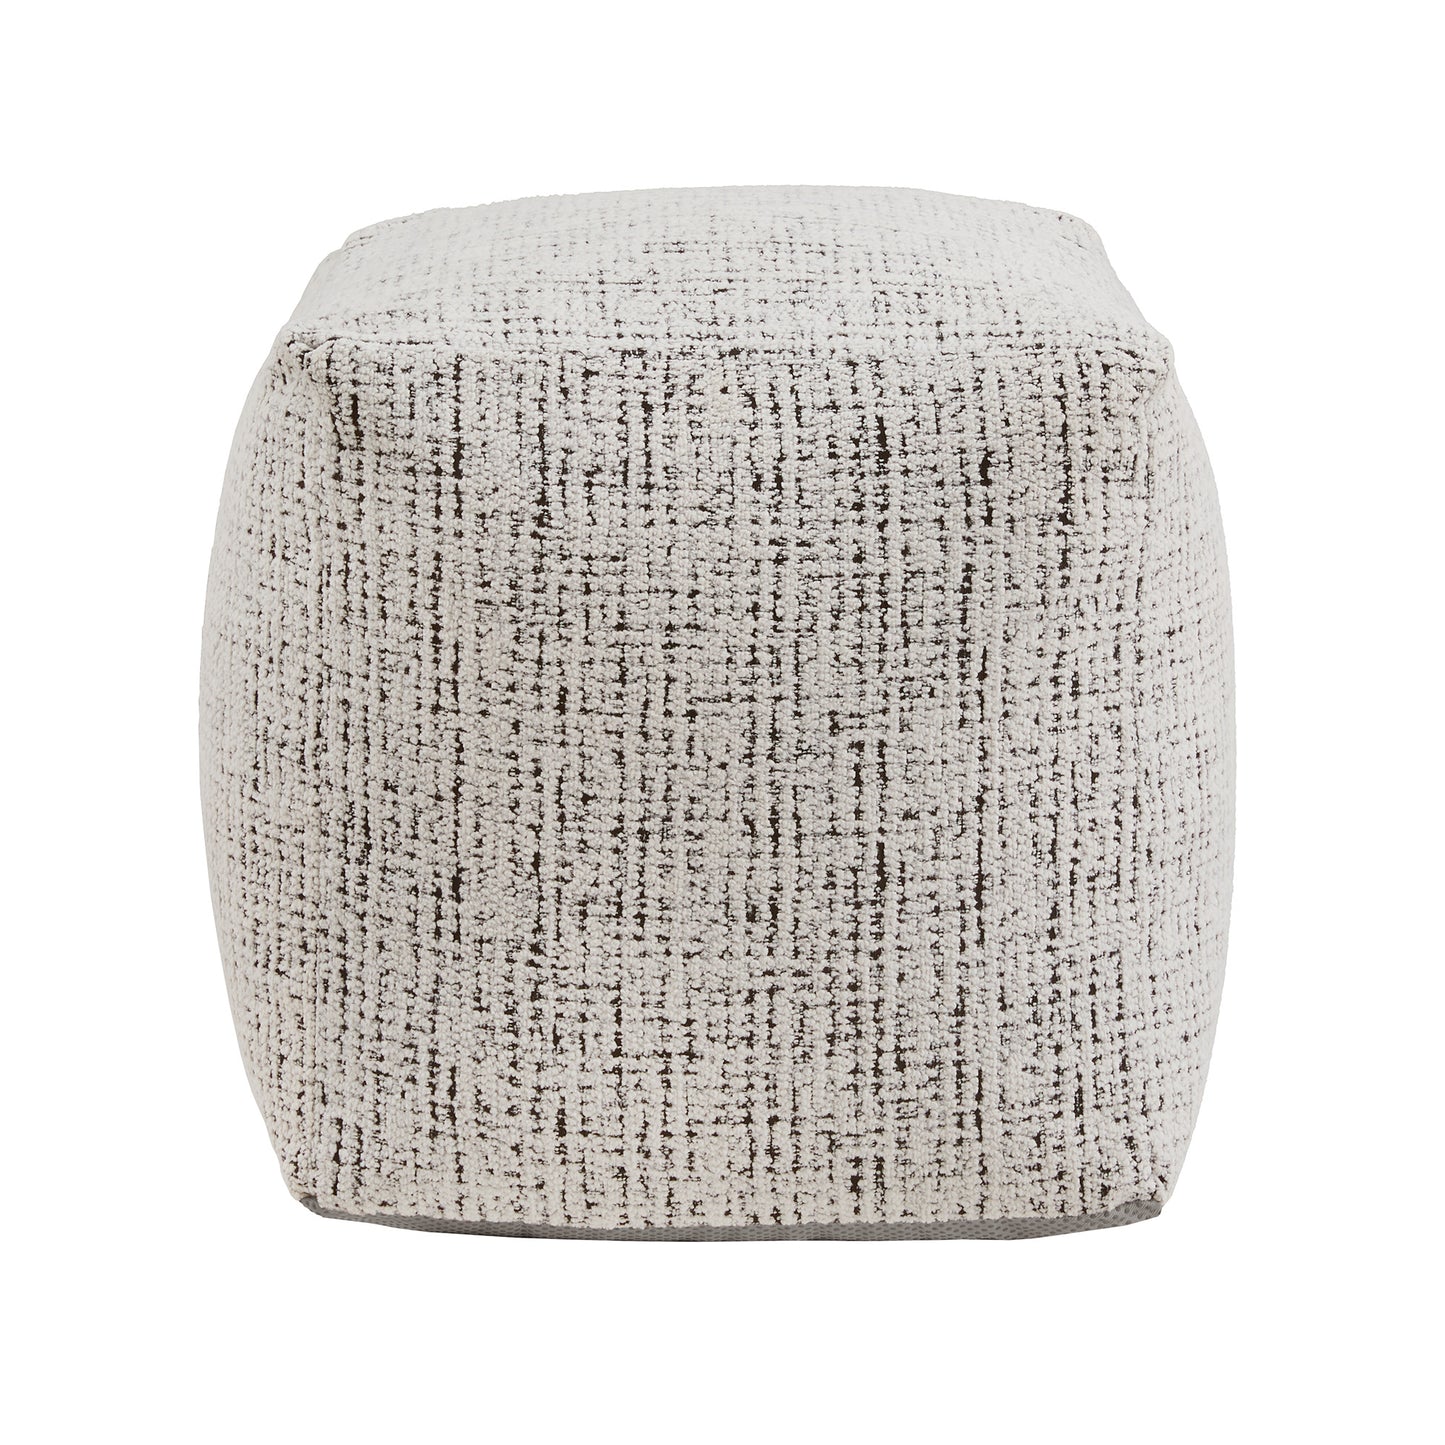 Upholstered Square Pouf Ottoman - Black & White Tweed Chenille